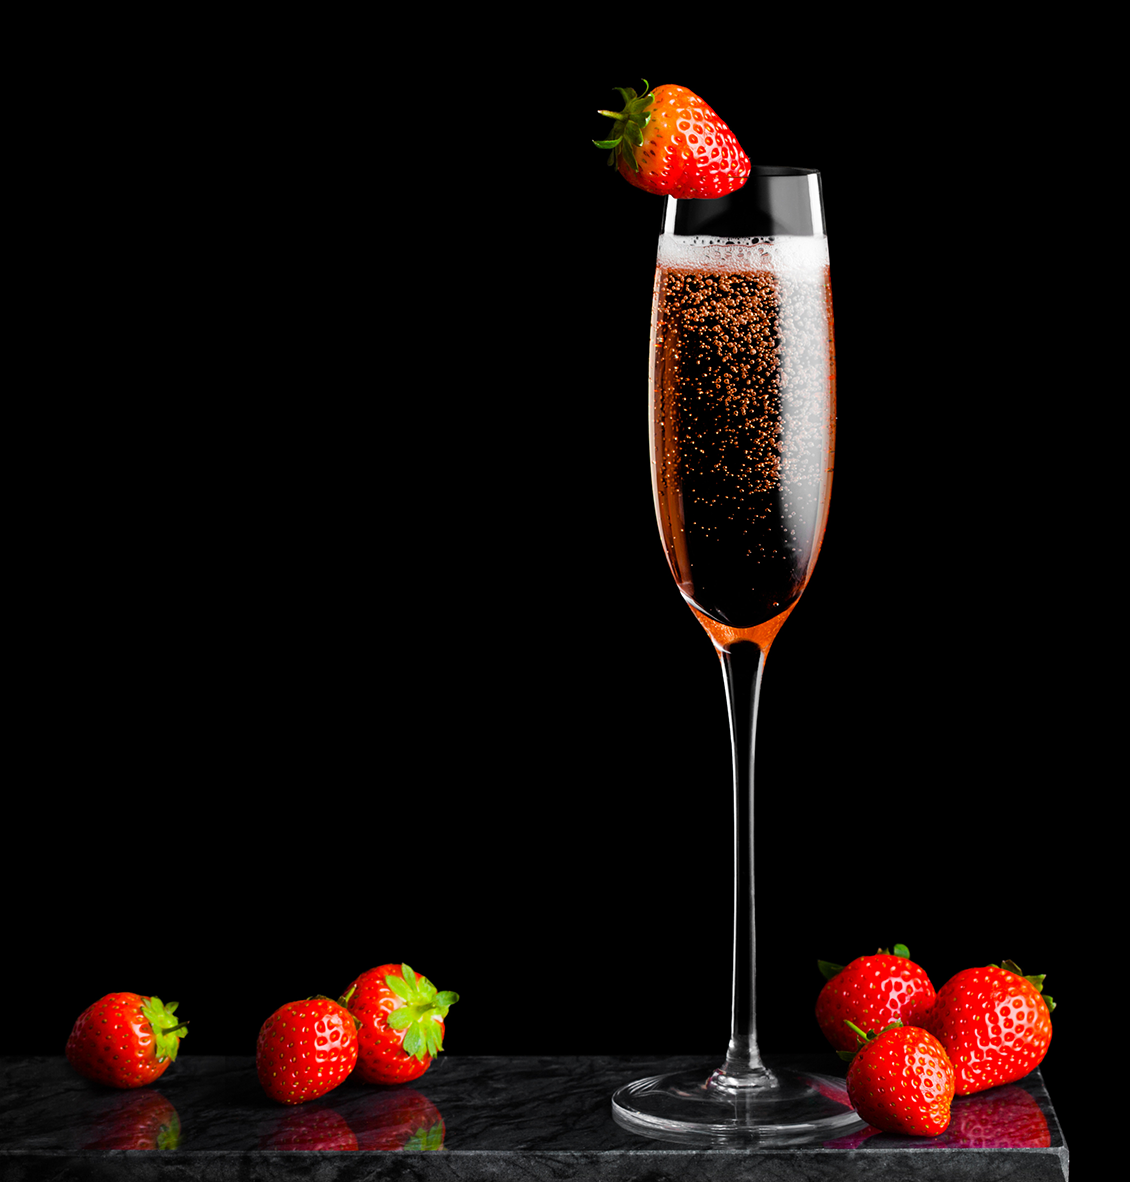 A glass of Champagne rosé with strawberries